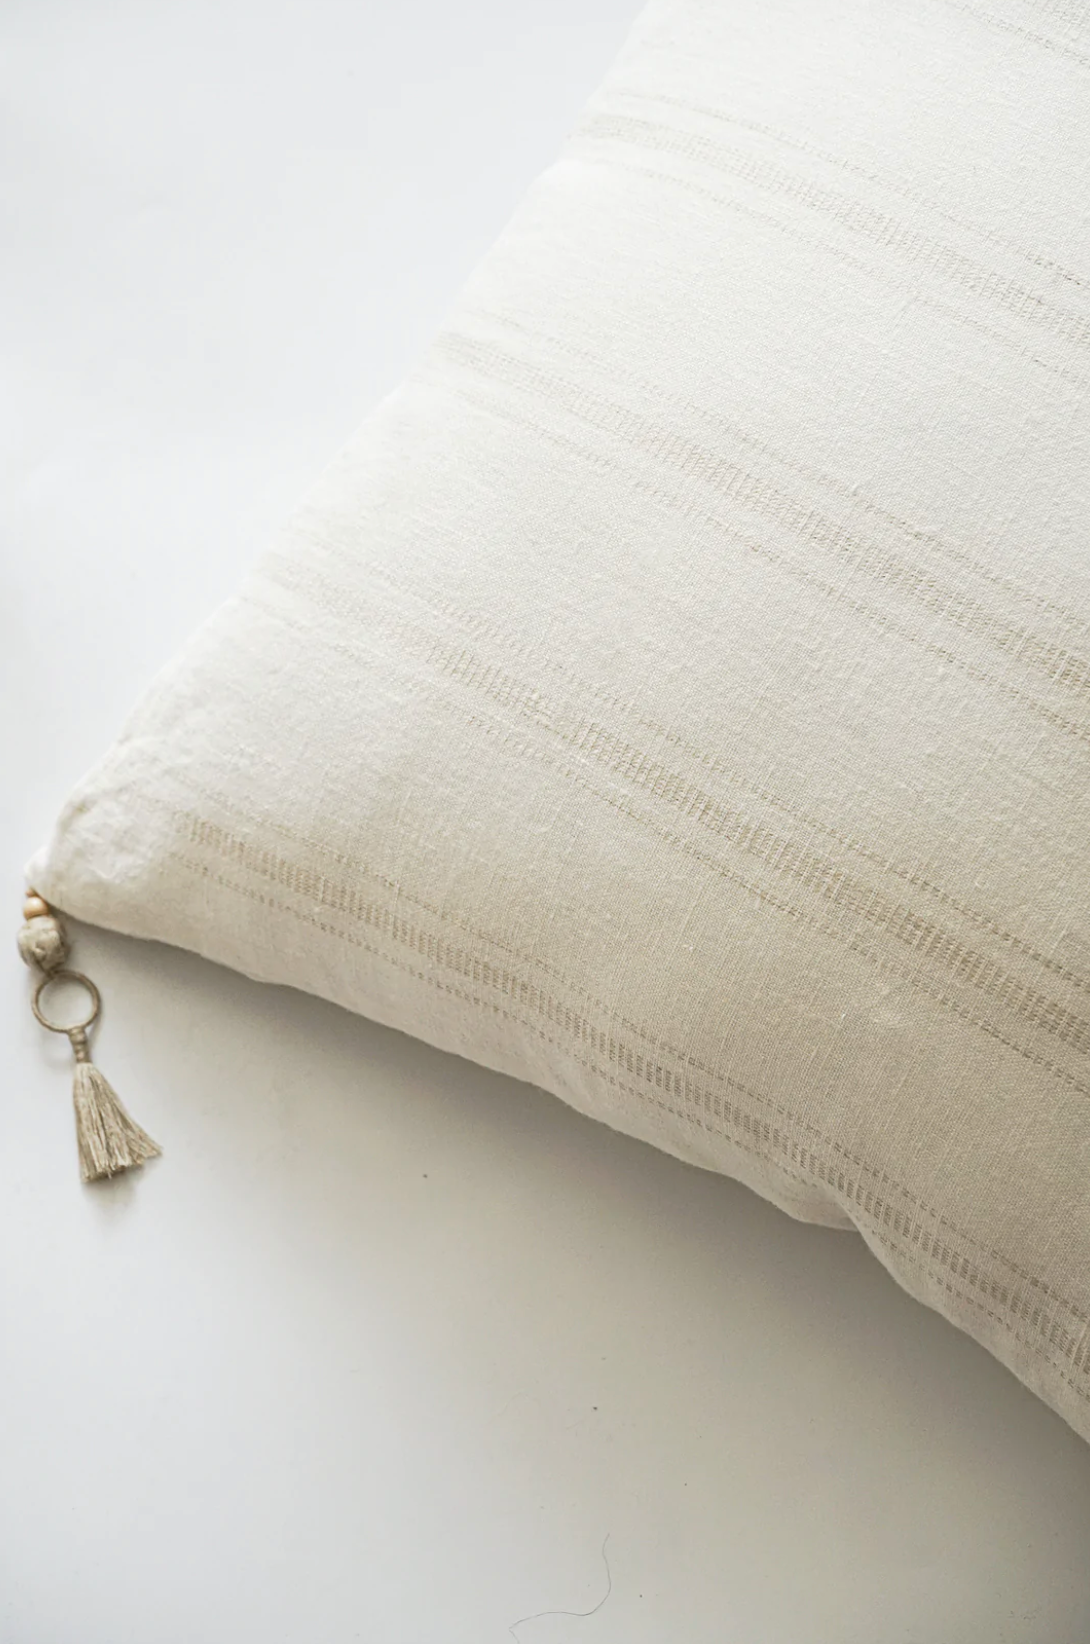 White with Beige Stripes Linen Pillows